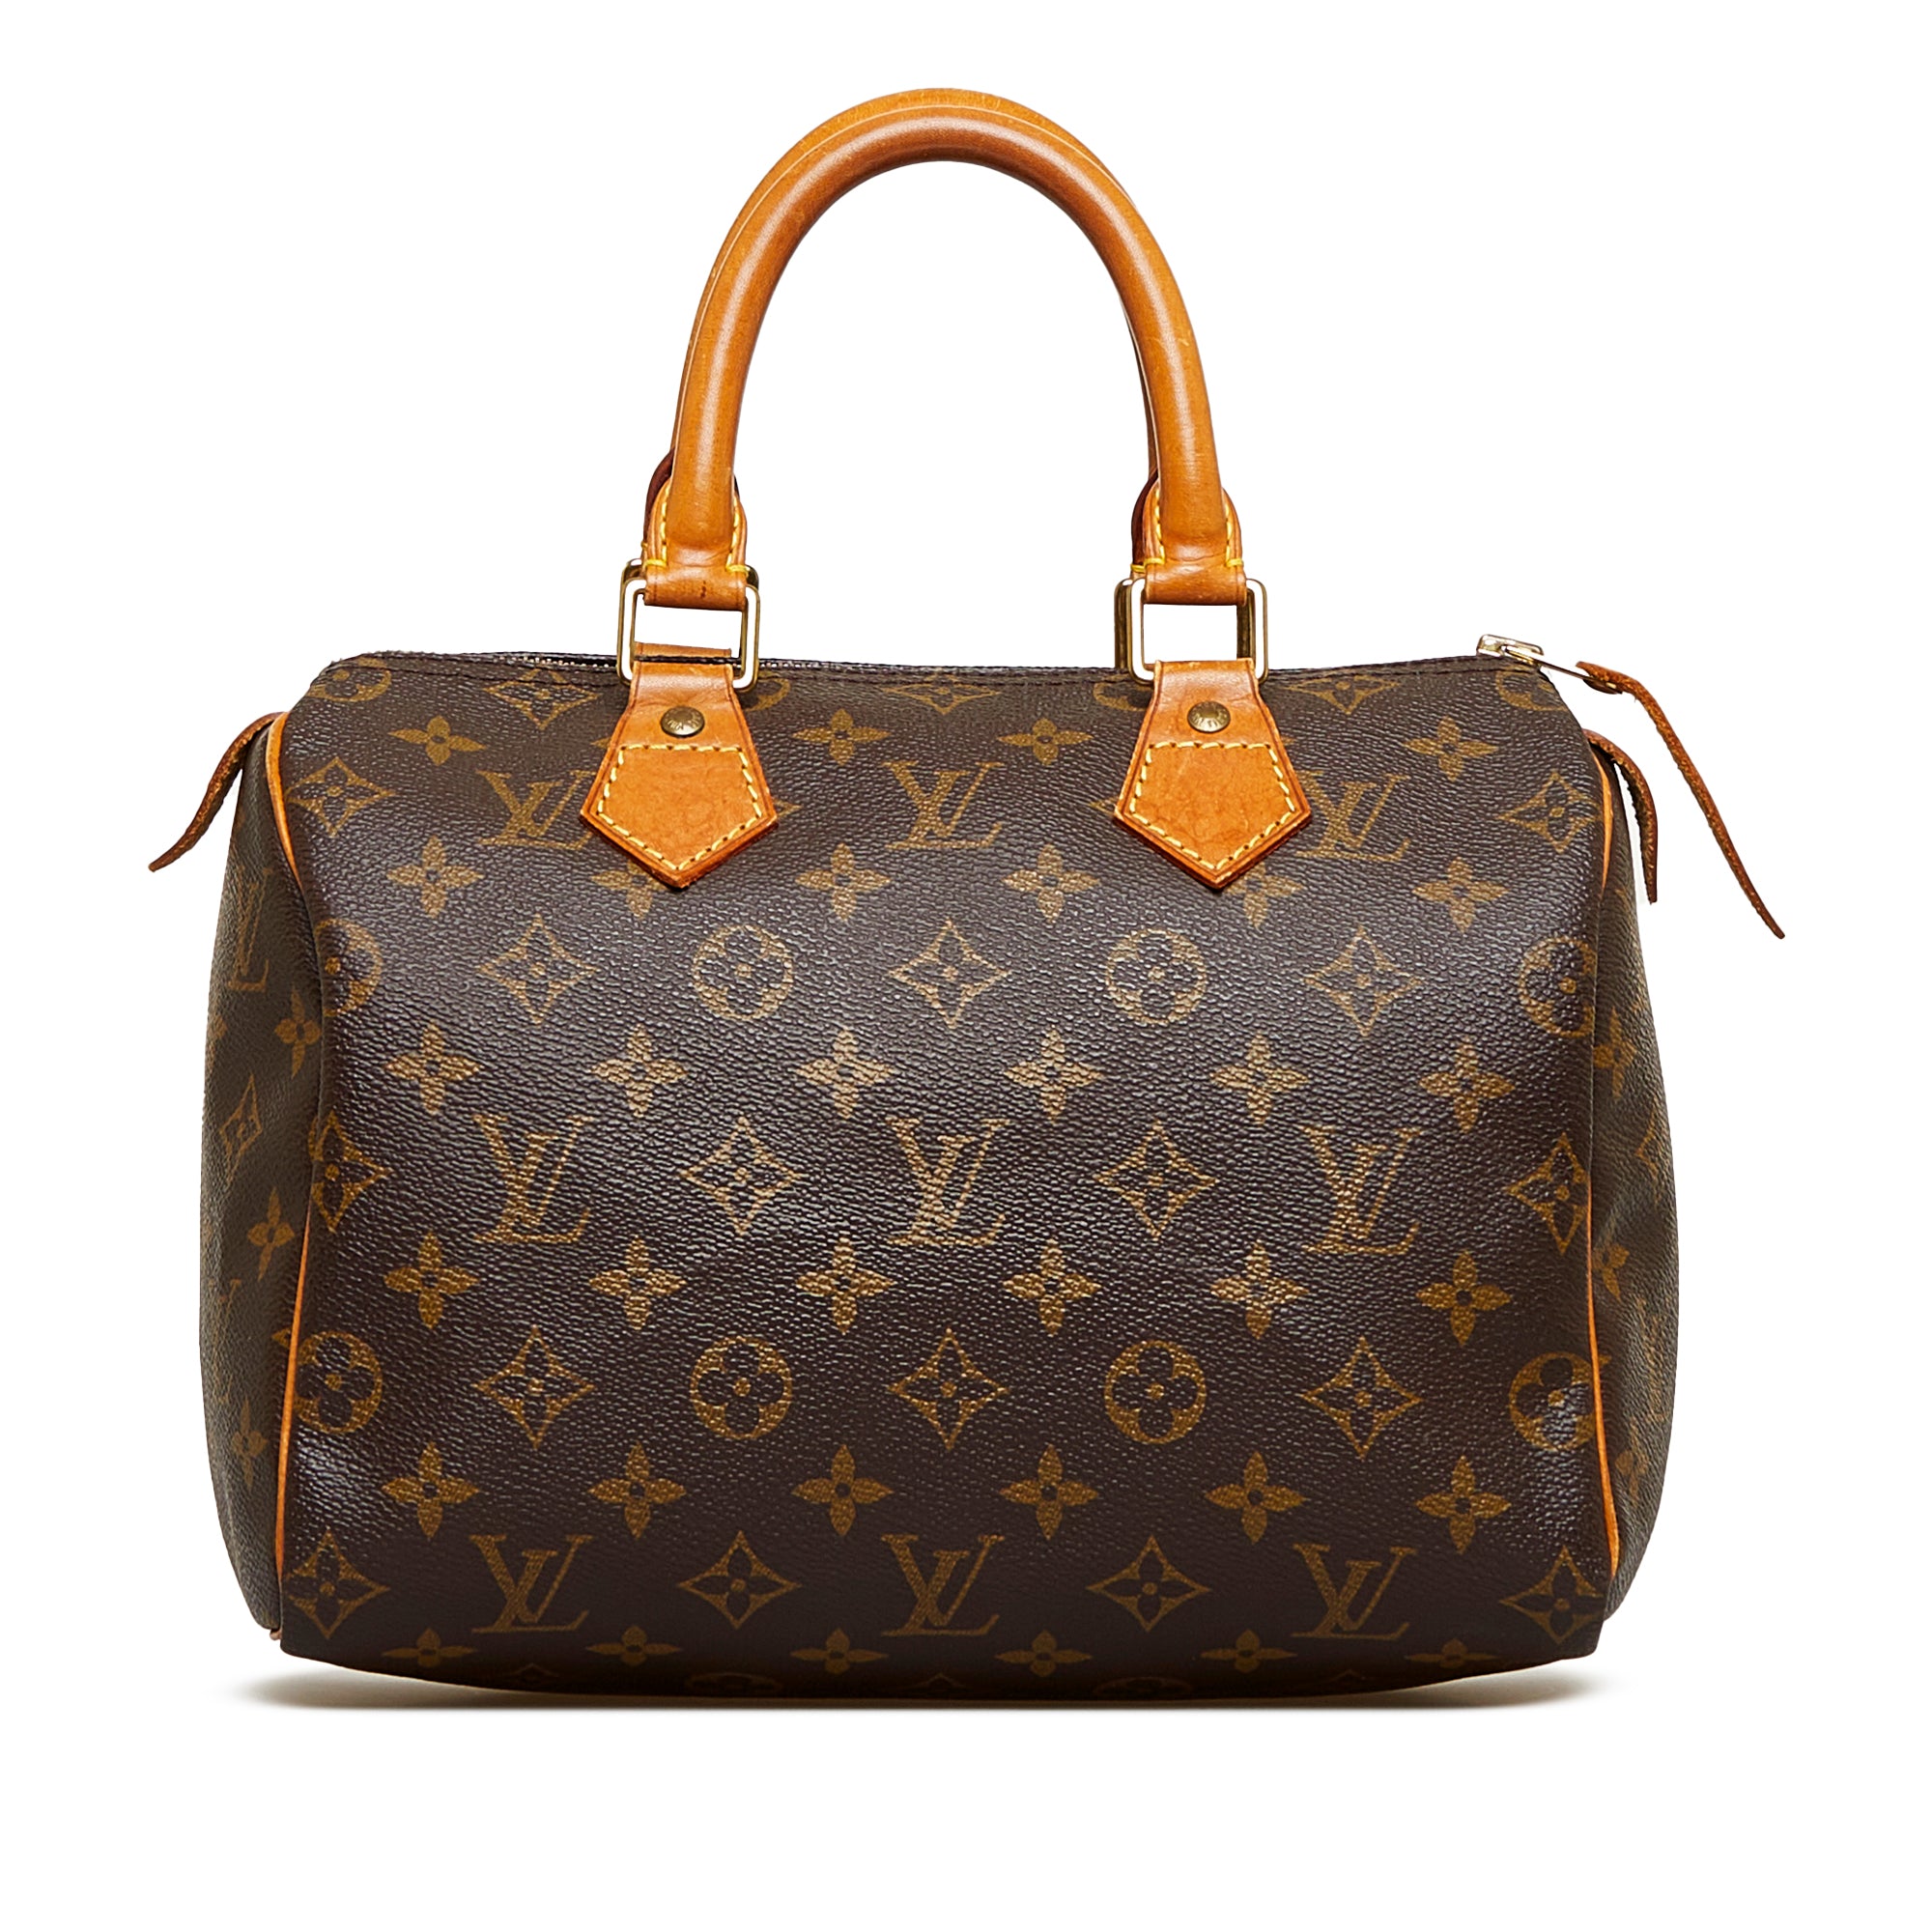 LOUIS VUITTON TIVOLI PM  Review and Comparison with the Speedy 25